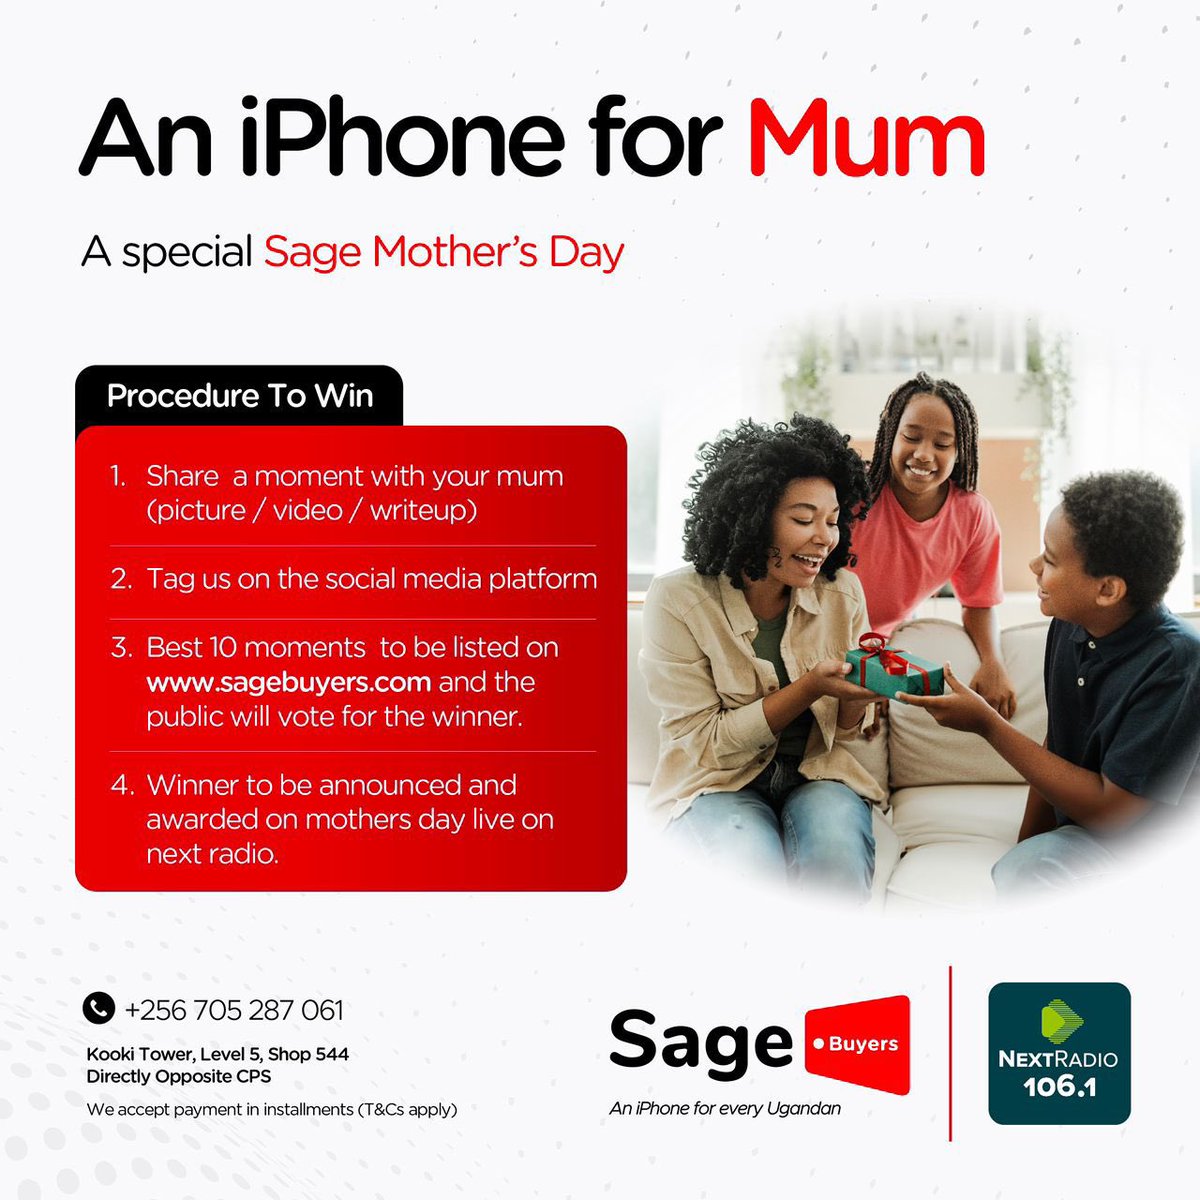 🌟 Final Call for Entries! 📢 Hi Friends, this is your last chance to submit your heartfelt moments for our #SageMothersDay contest! Voting begins tomorrow at 7 PM live on our sagebuyers.com #NextMothersDay